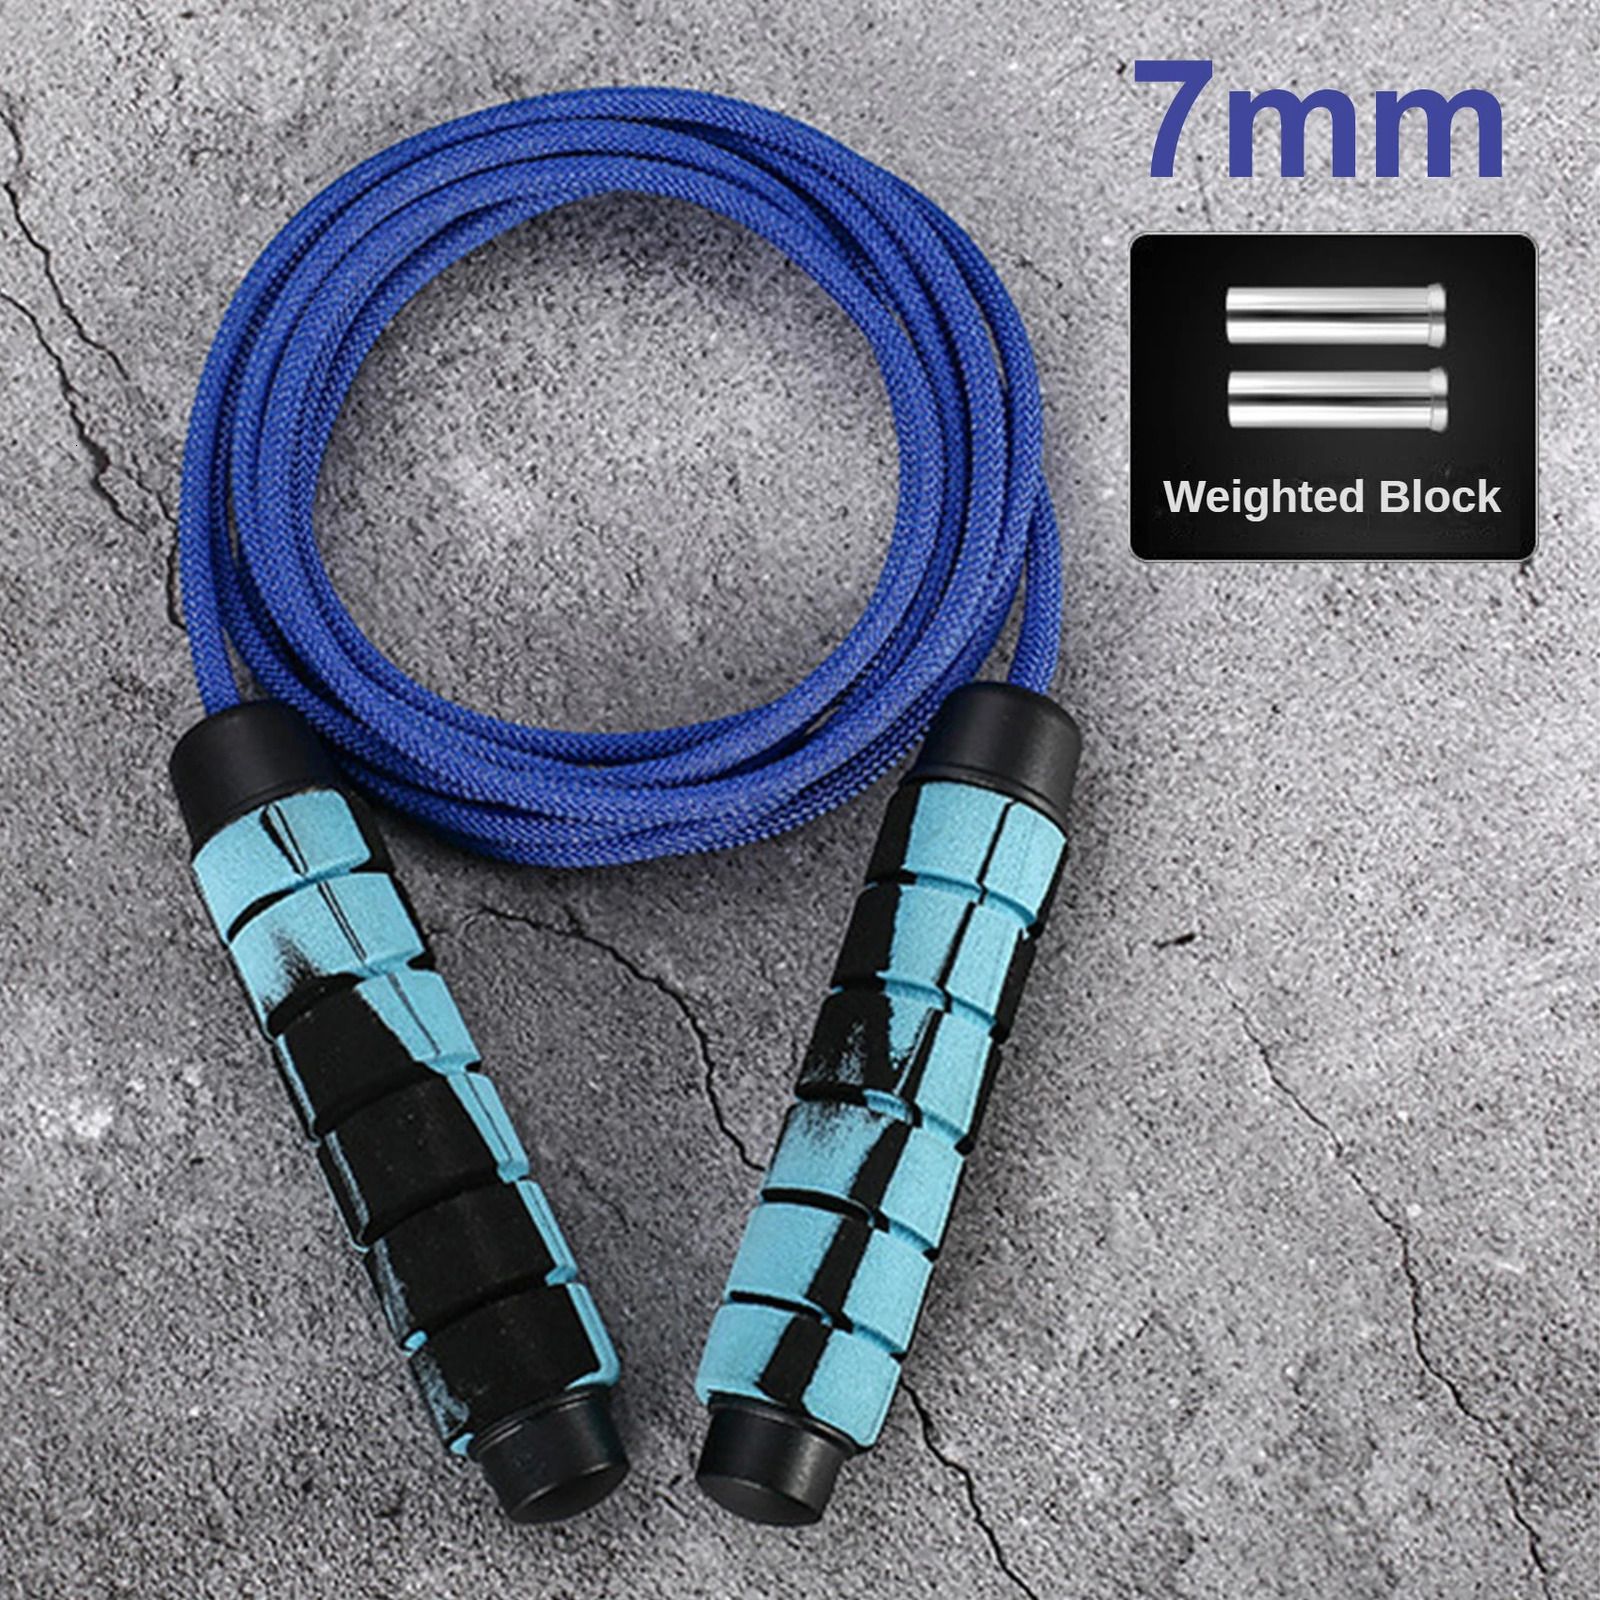 Blue-7mm Weighted